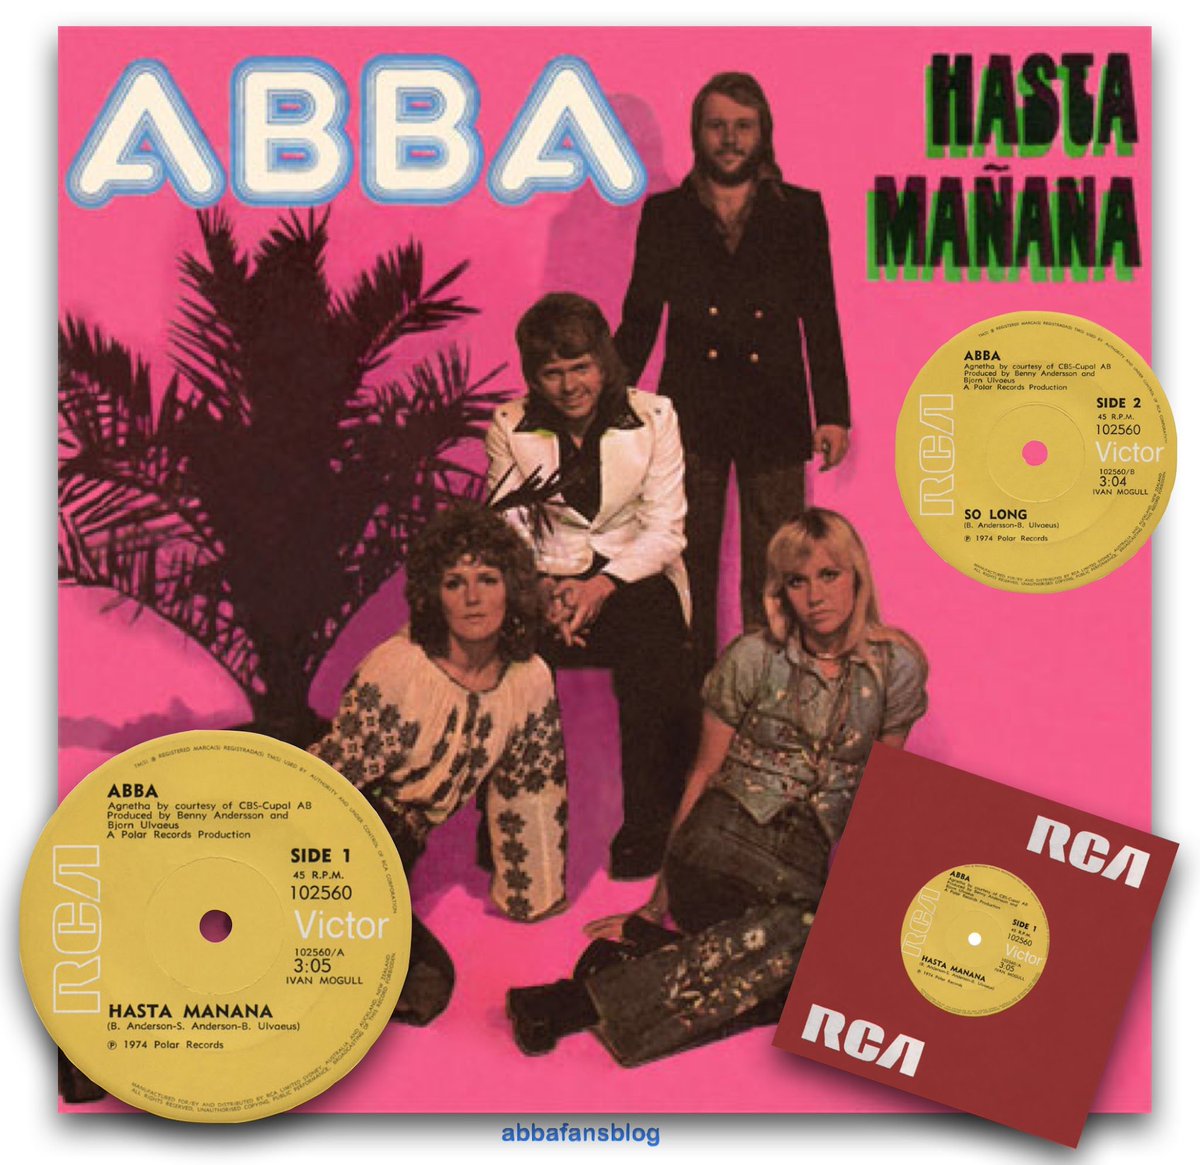 On this day in 1976 the @ABBA single “Hasta Manana” entered the charts in New Zealand where it reached number 9
#Abba #NewZealand #HastManana 
https://t.co/5W4U8N6iu1 https://t.co/c1MvtmByvP